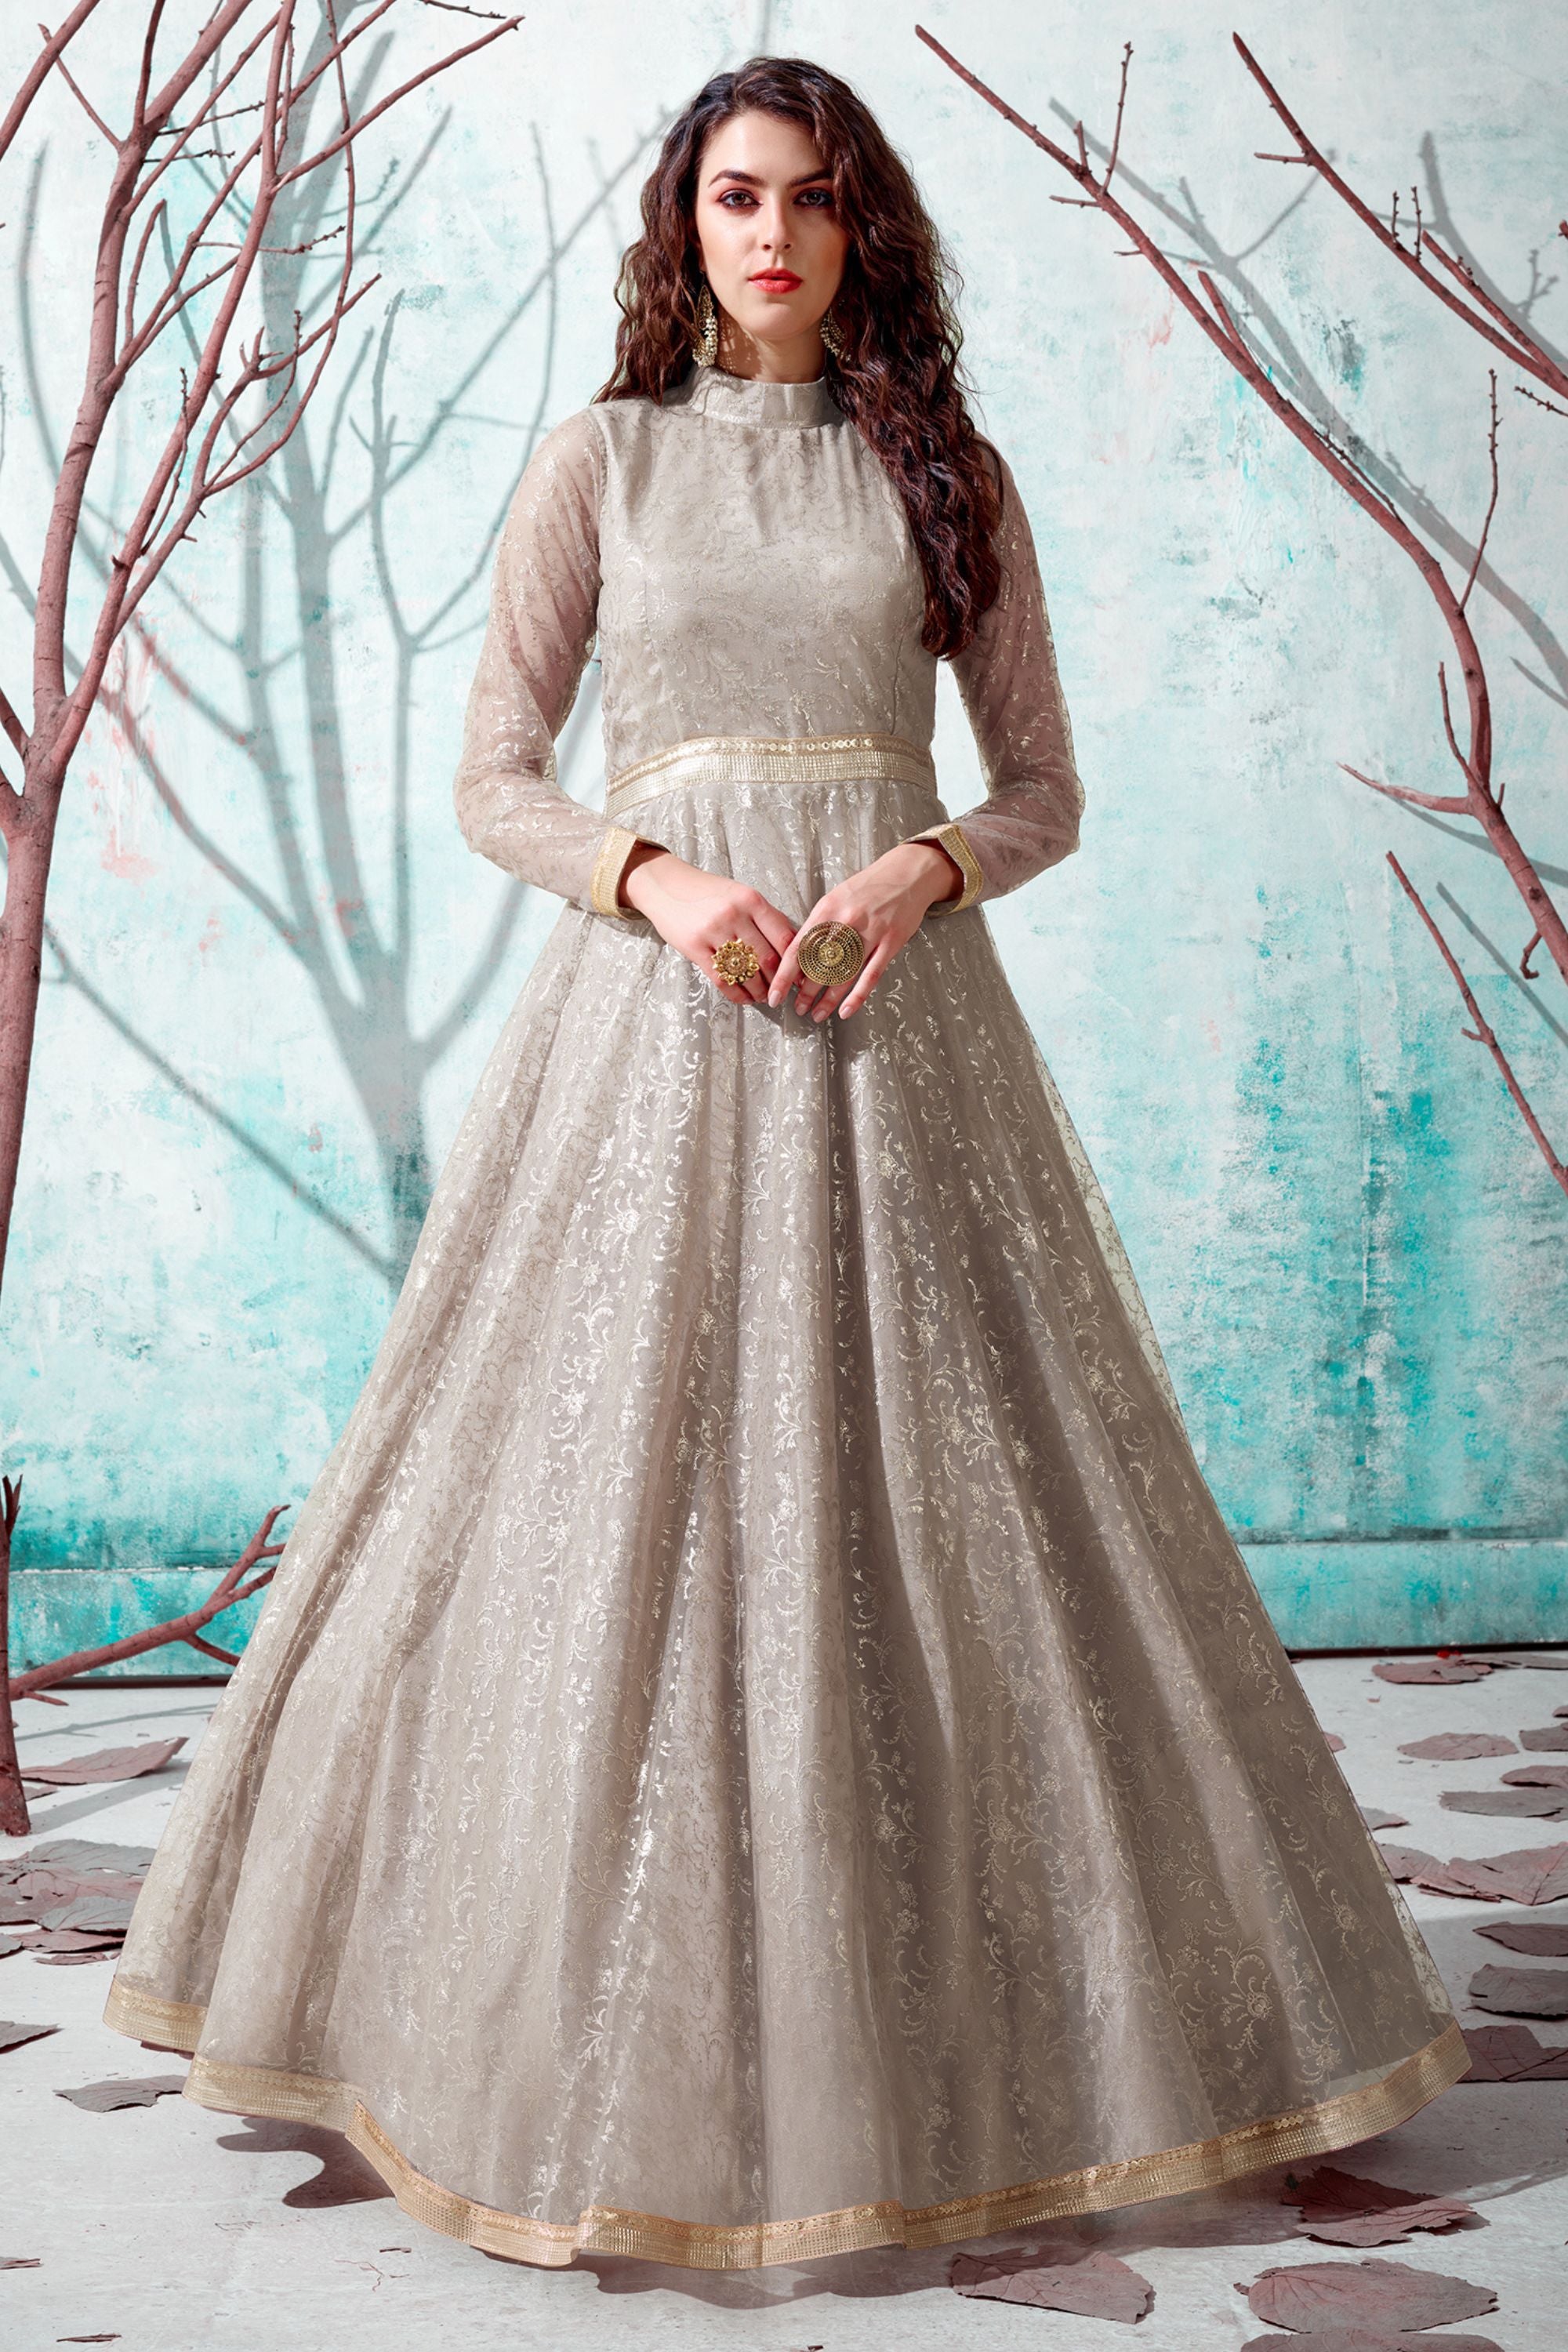 Buy Moss Green Pearl Embroidered Net Gown Online - RI.Ritu Kumar India  Store View